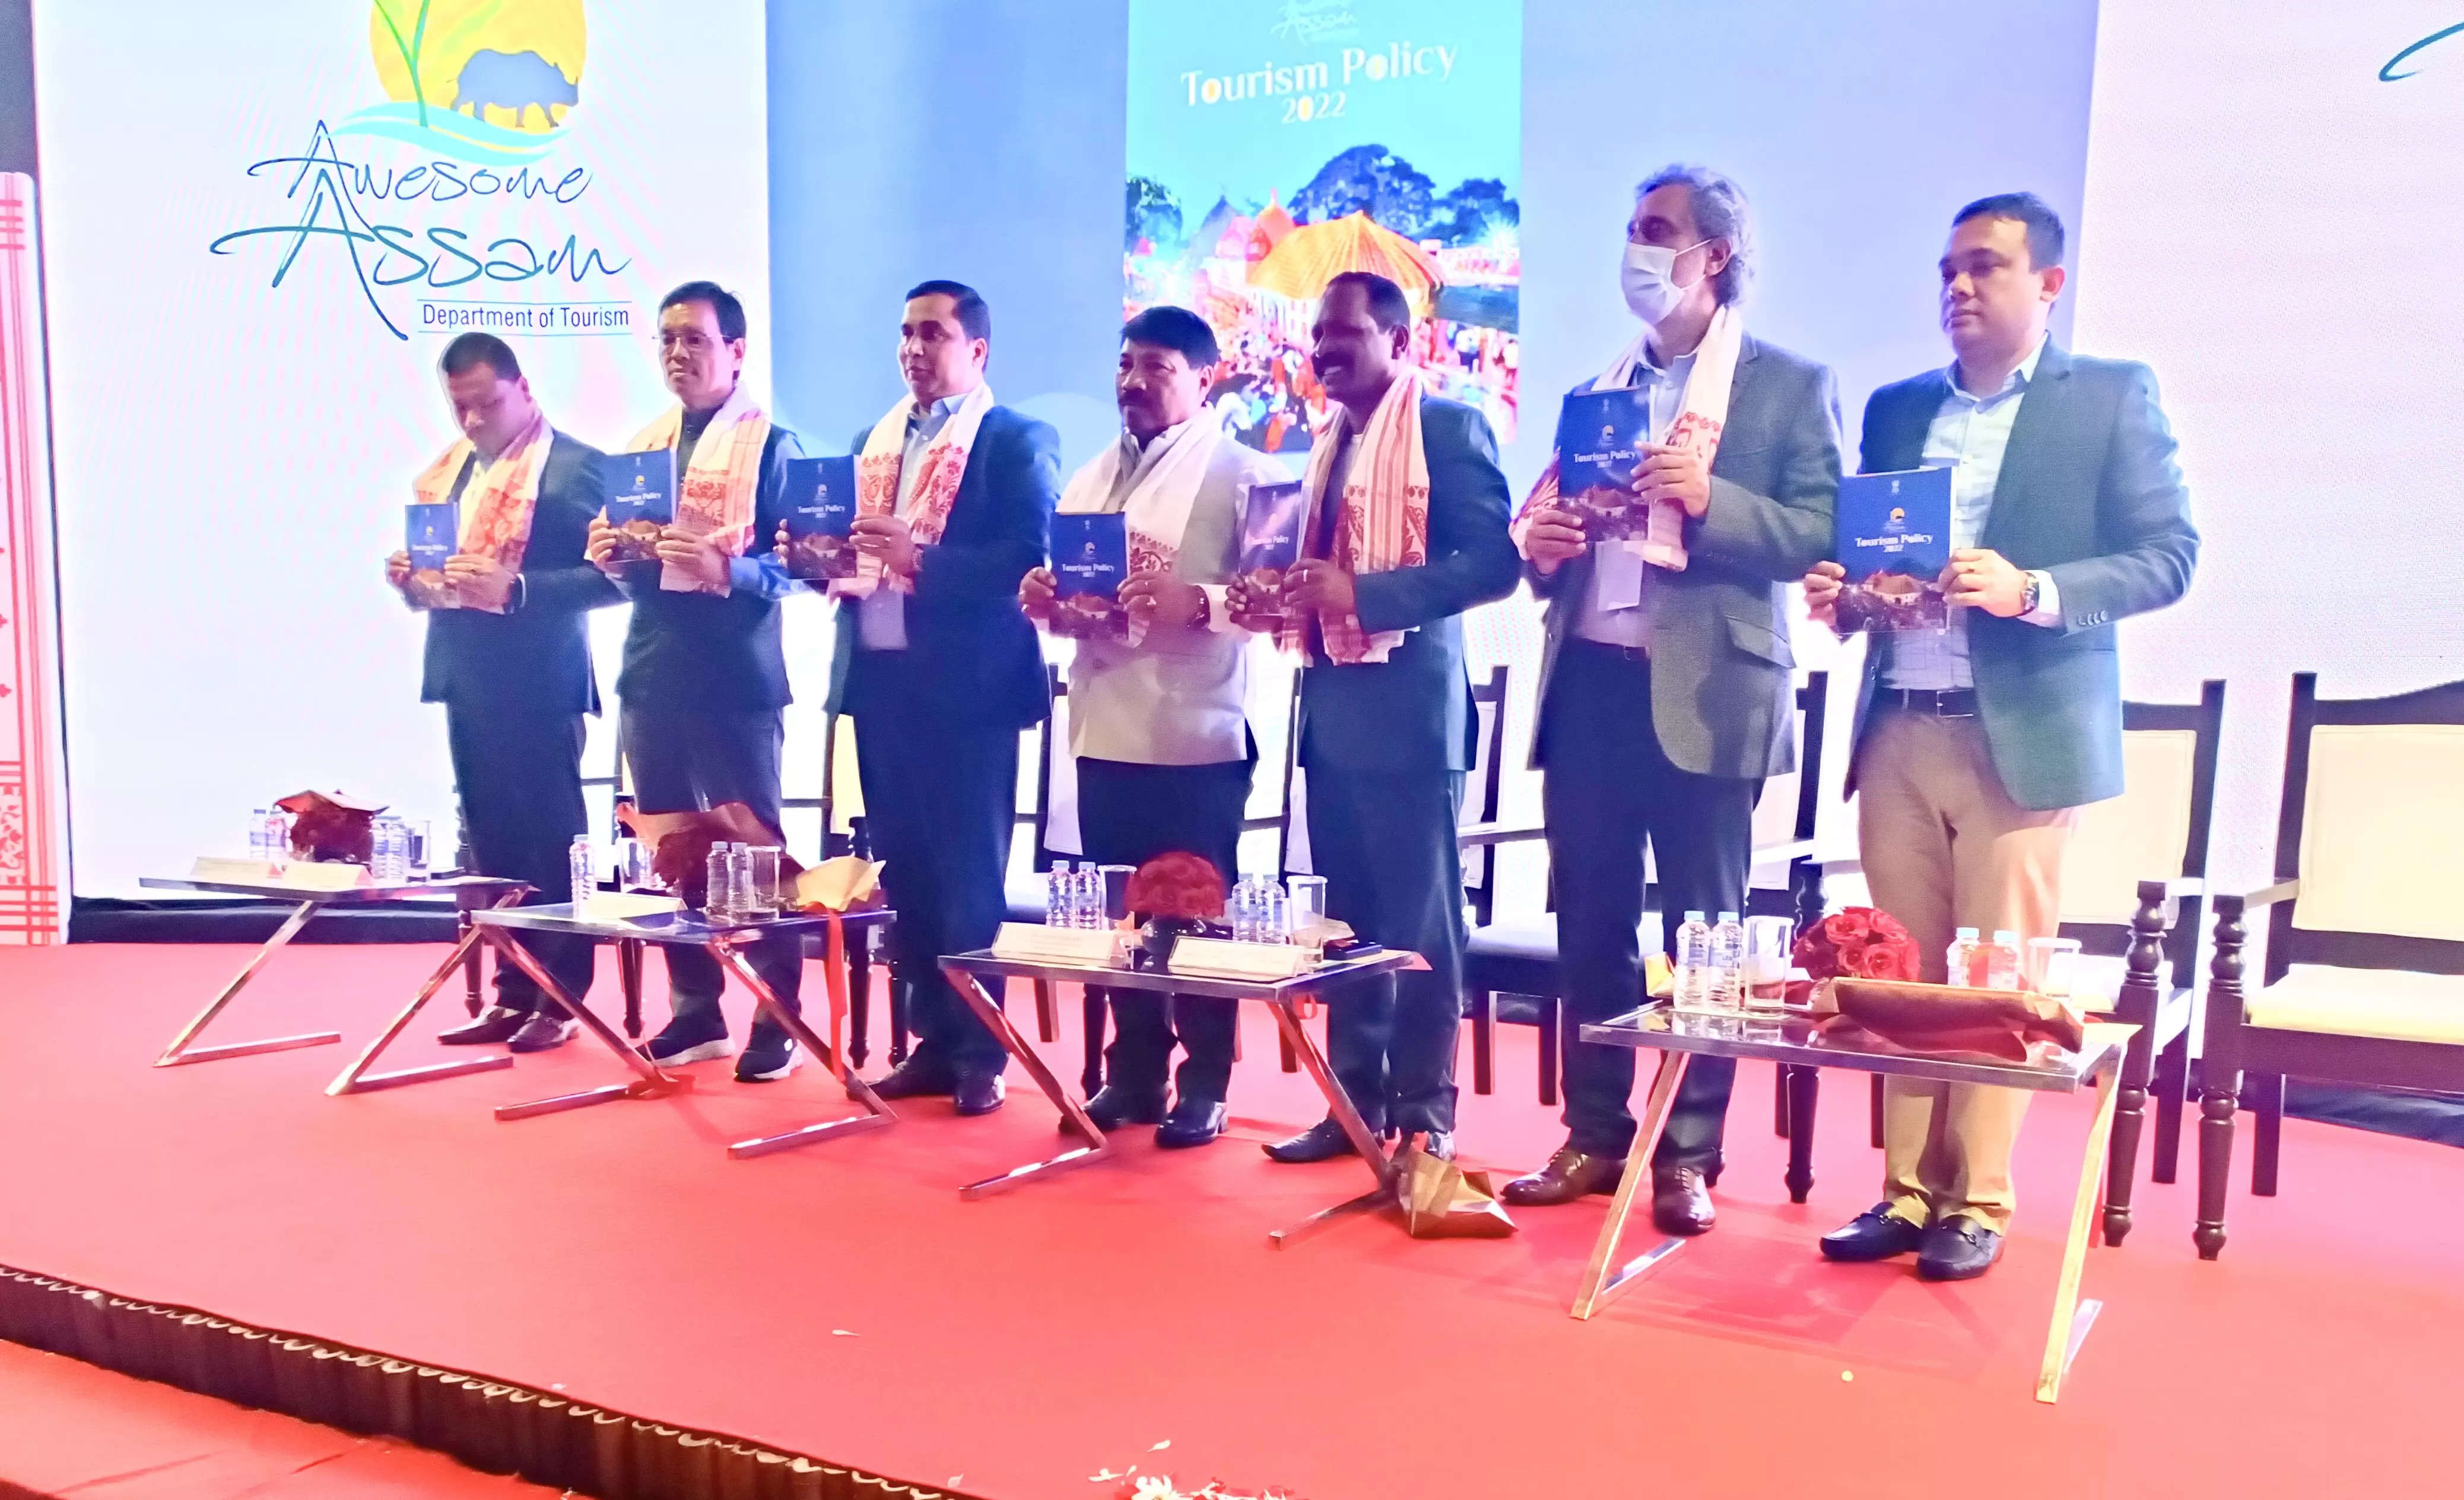  The Assam Tourism Policy 2022 being formally launched in Delhi. Assam state tourism minister, Jayanta Mallabaruah (third from left) along with ministers of the Assam cabinet — agriculture minister, Atul Bora; handloom & textiles minister, Urkhao Gwra Brahma; welfare of tea tribes minister, Sanjoy Kishan; Assam's additional chief secretary, Maninder Singh; and Prabhati Thaosen, Assam's secretary - tourism, among others.